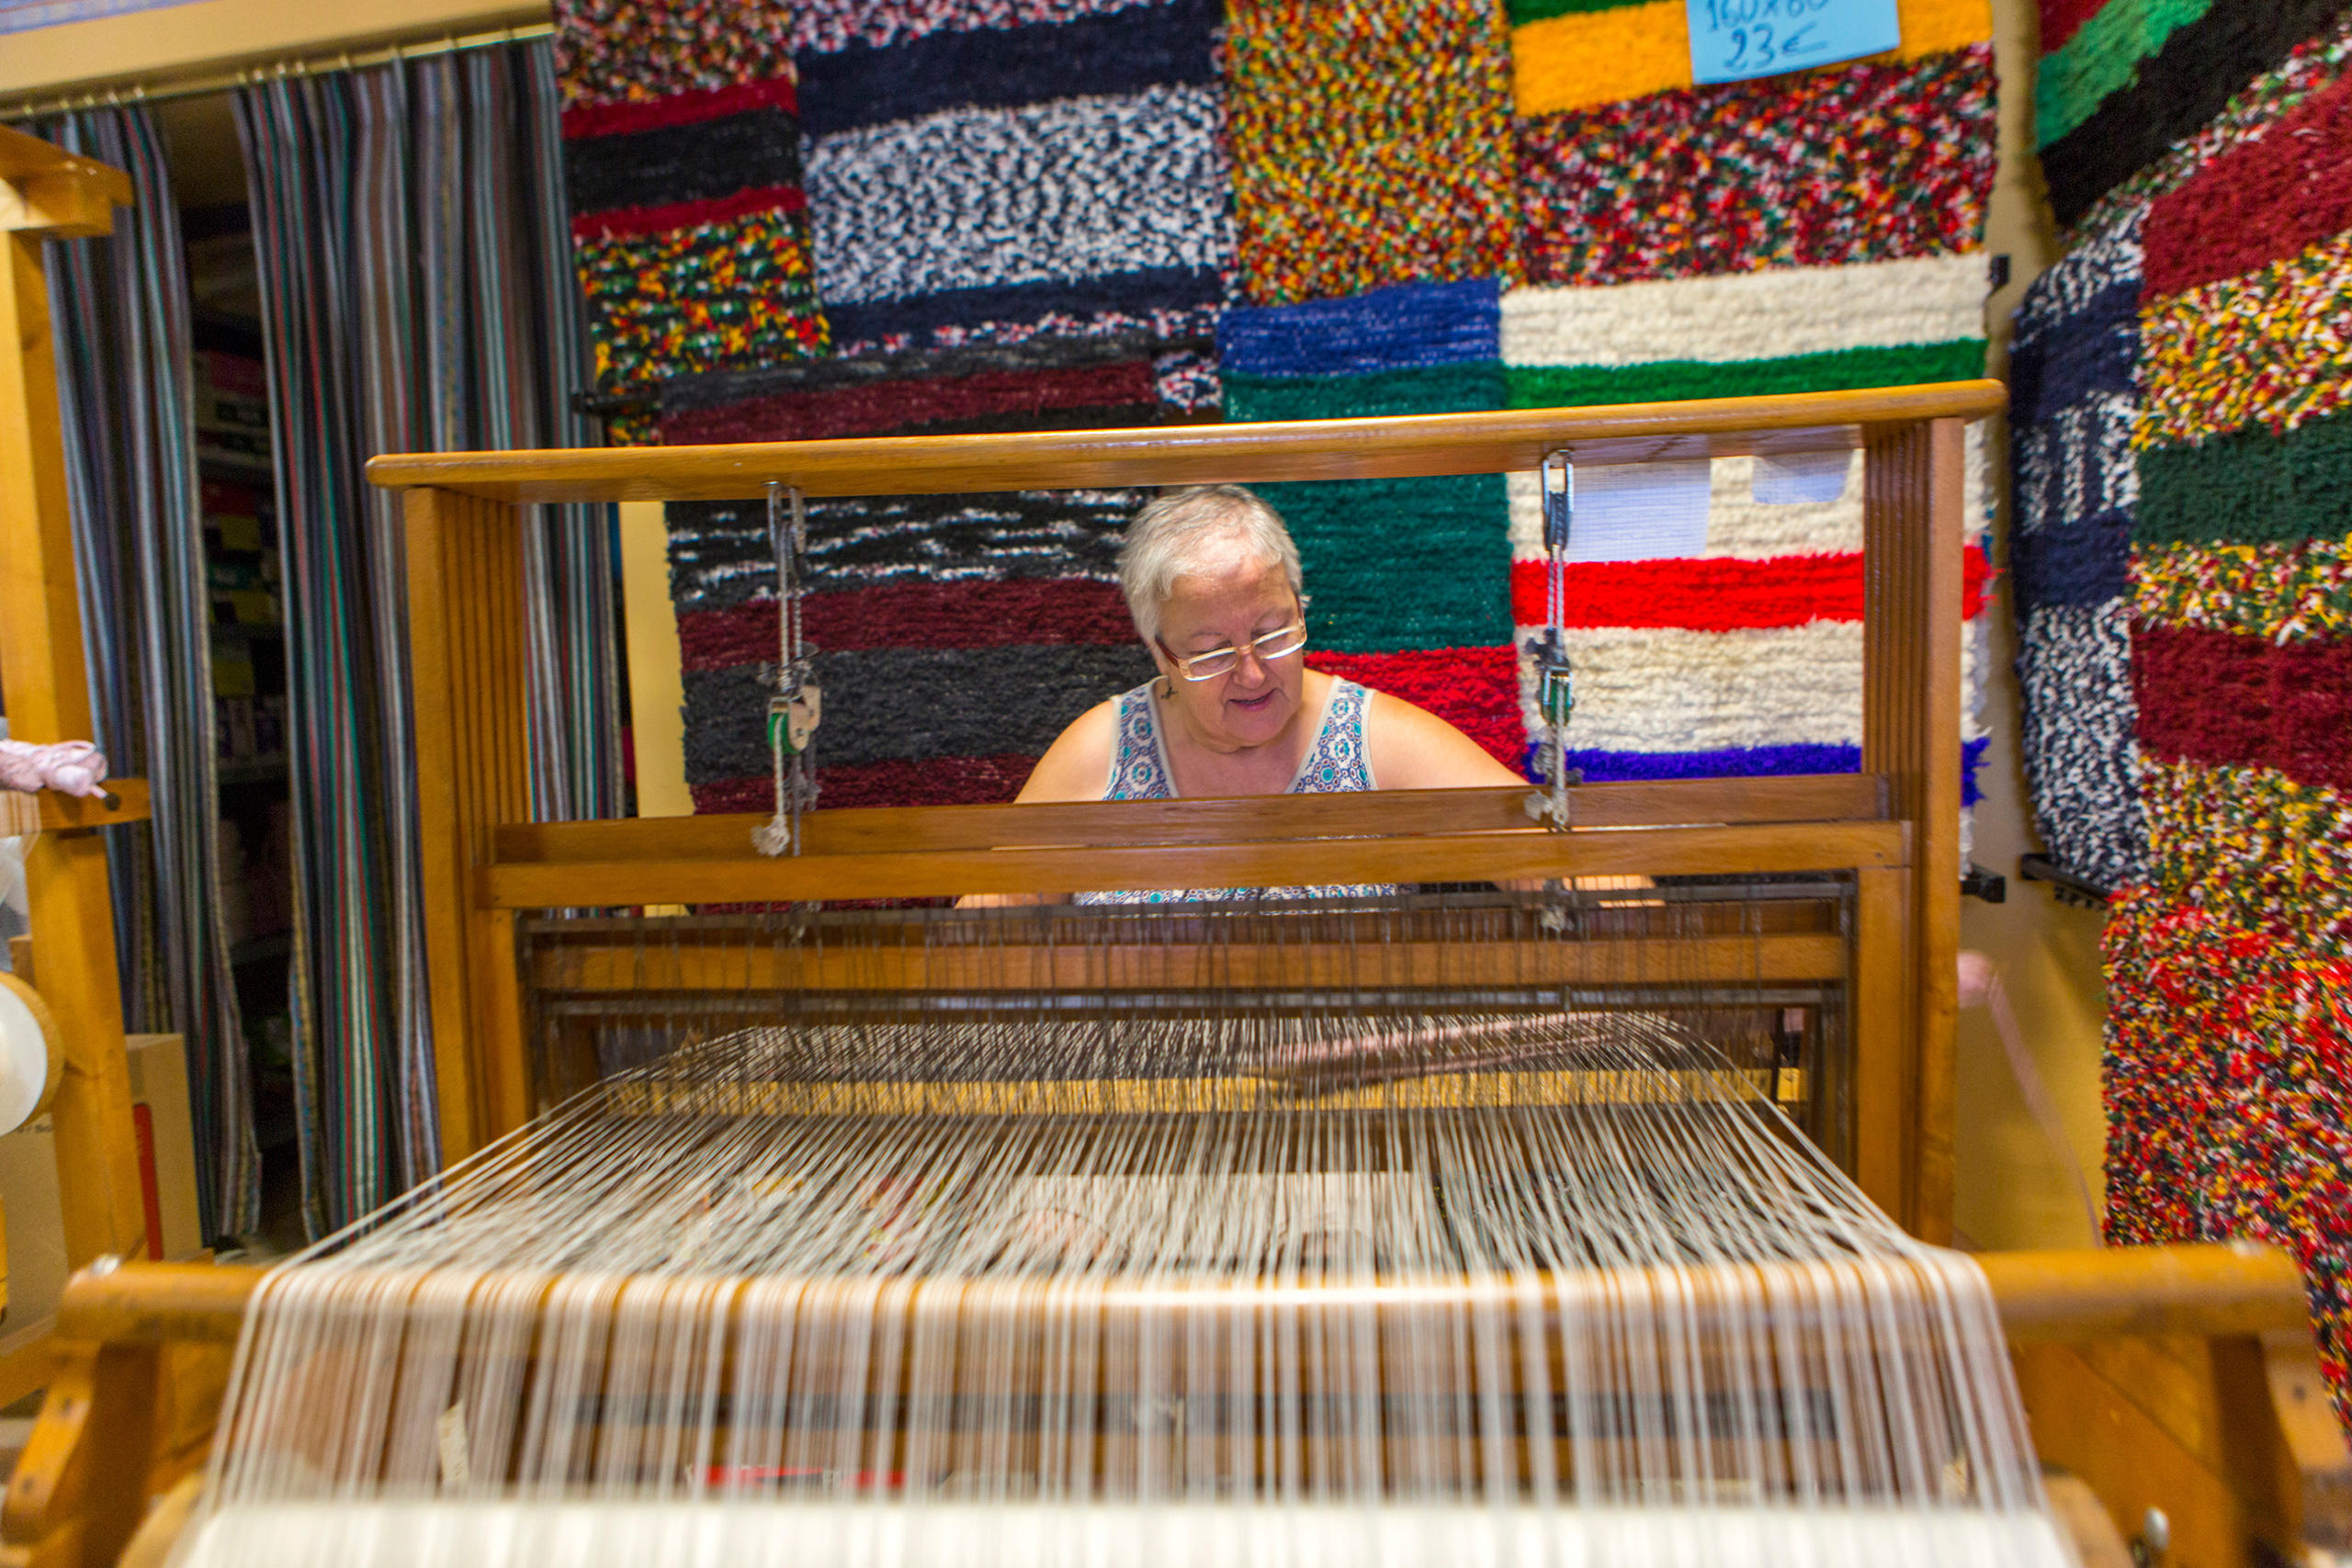 Traditional loom in Andalucia